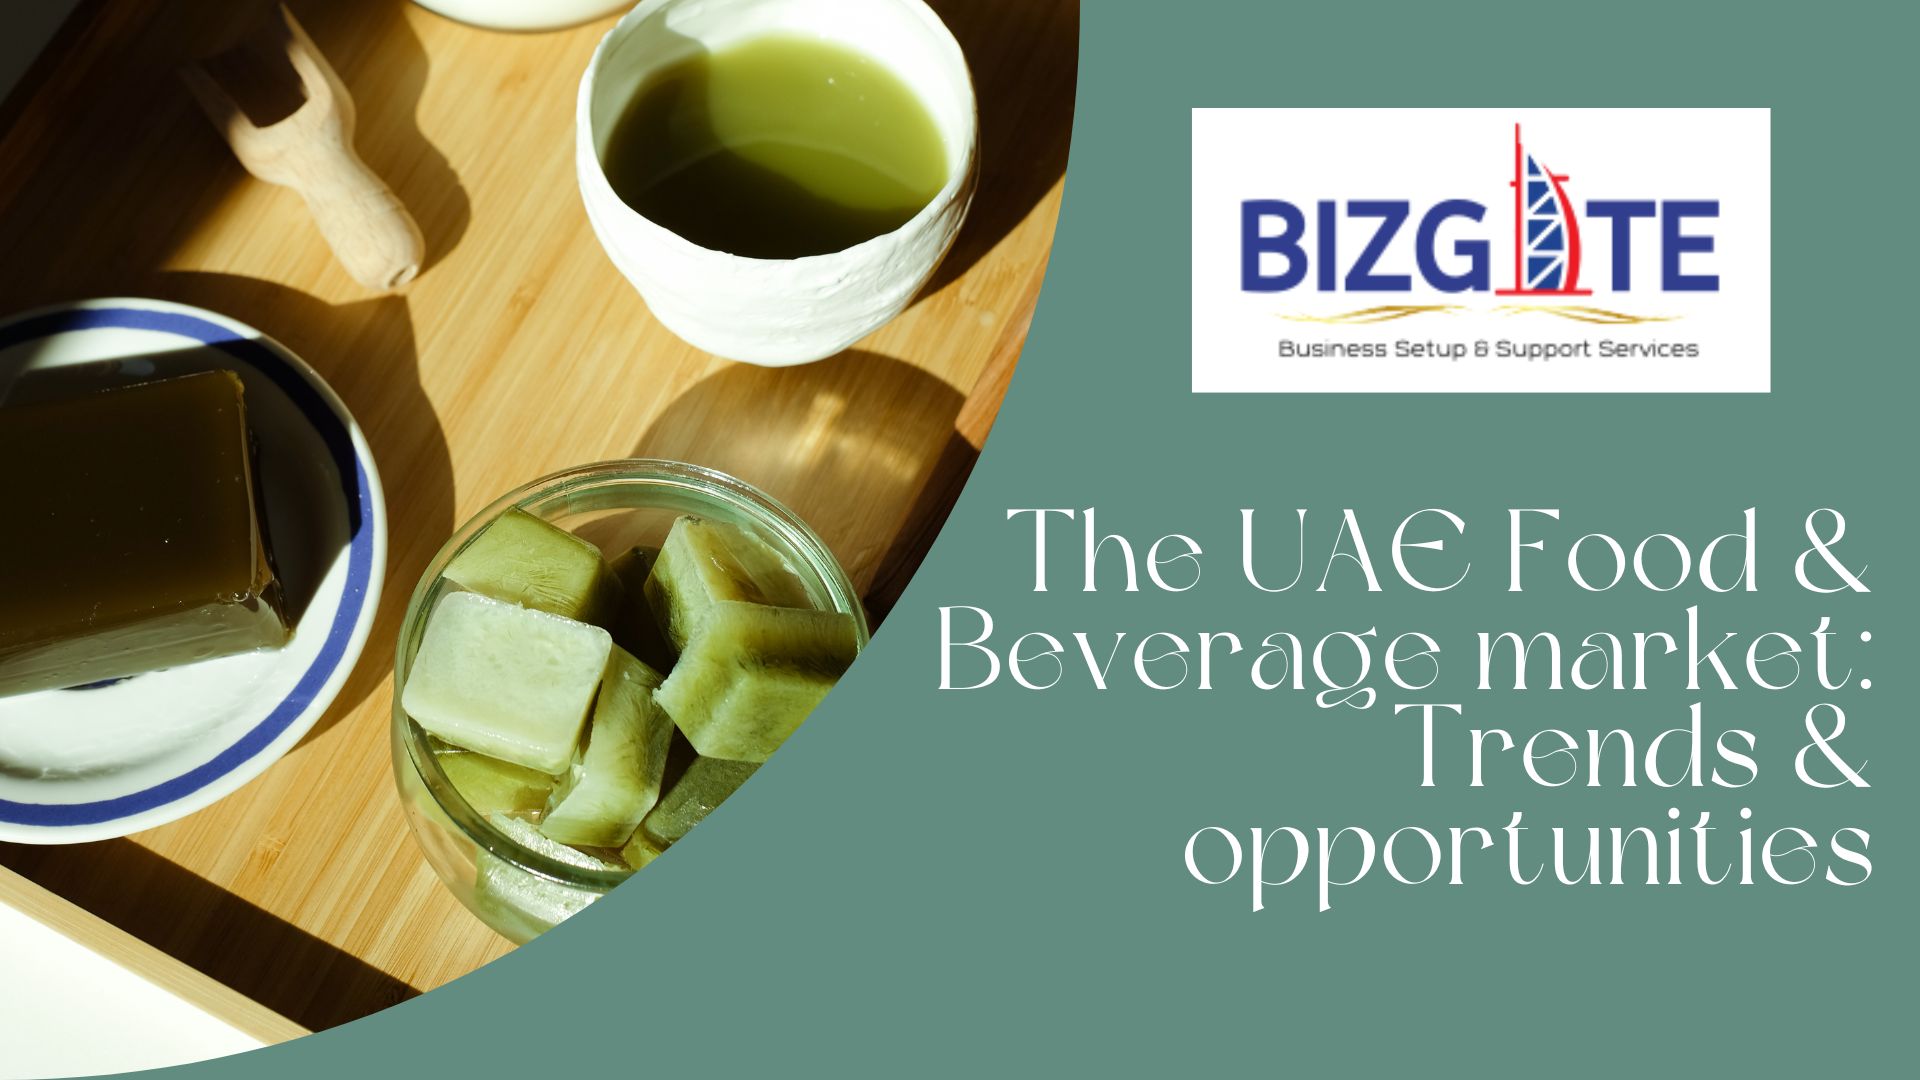 You are currently viewing The UAE Food & Beverage market: Trends & opportunities | Business Setup in Dubai